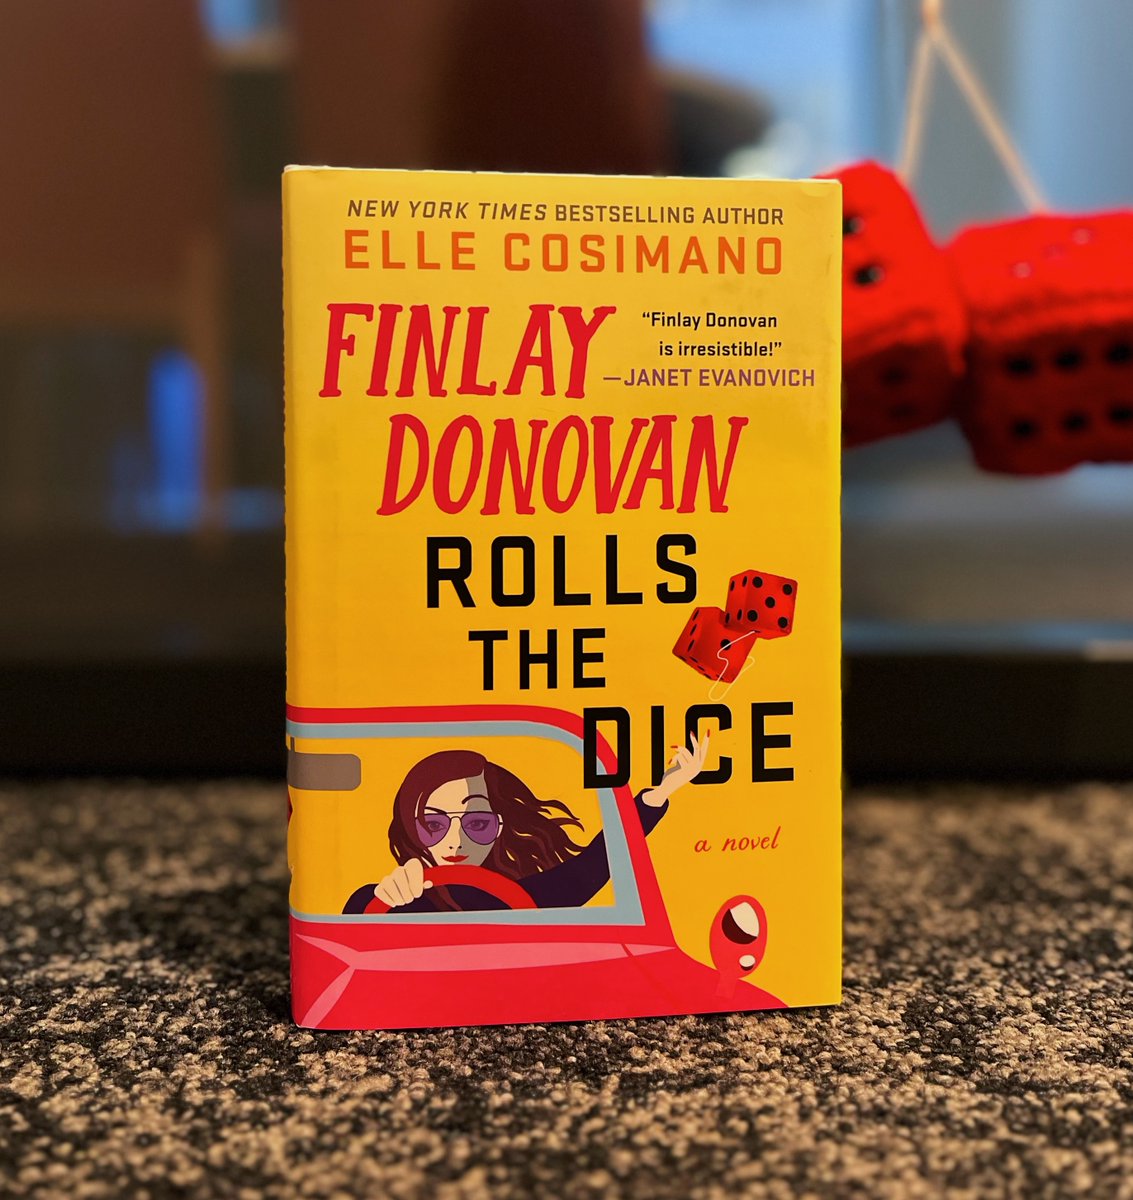 From New York Times bestseller Elle Cosimano comes FINLAY DONOVAN ROLLS THE DICE—the fiercely anticipated next installment in the beloved Finlay Donovan series. Out next Tuesday! 🎲 Preorder now: static.macmillan.com/static/minotau…